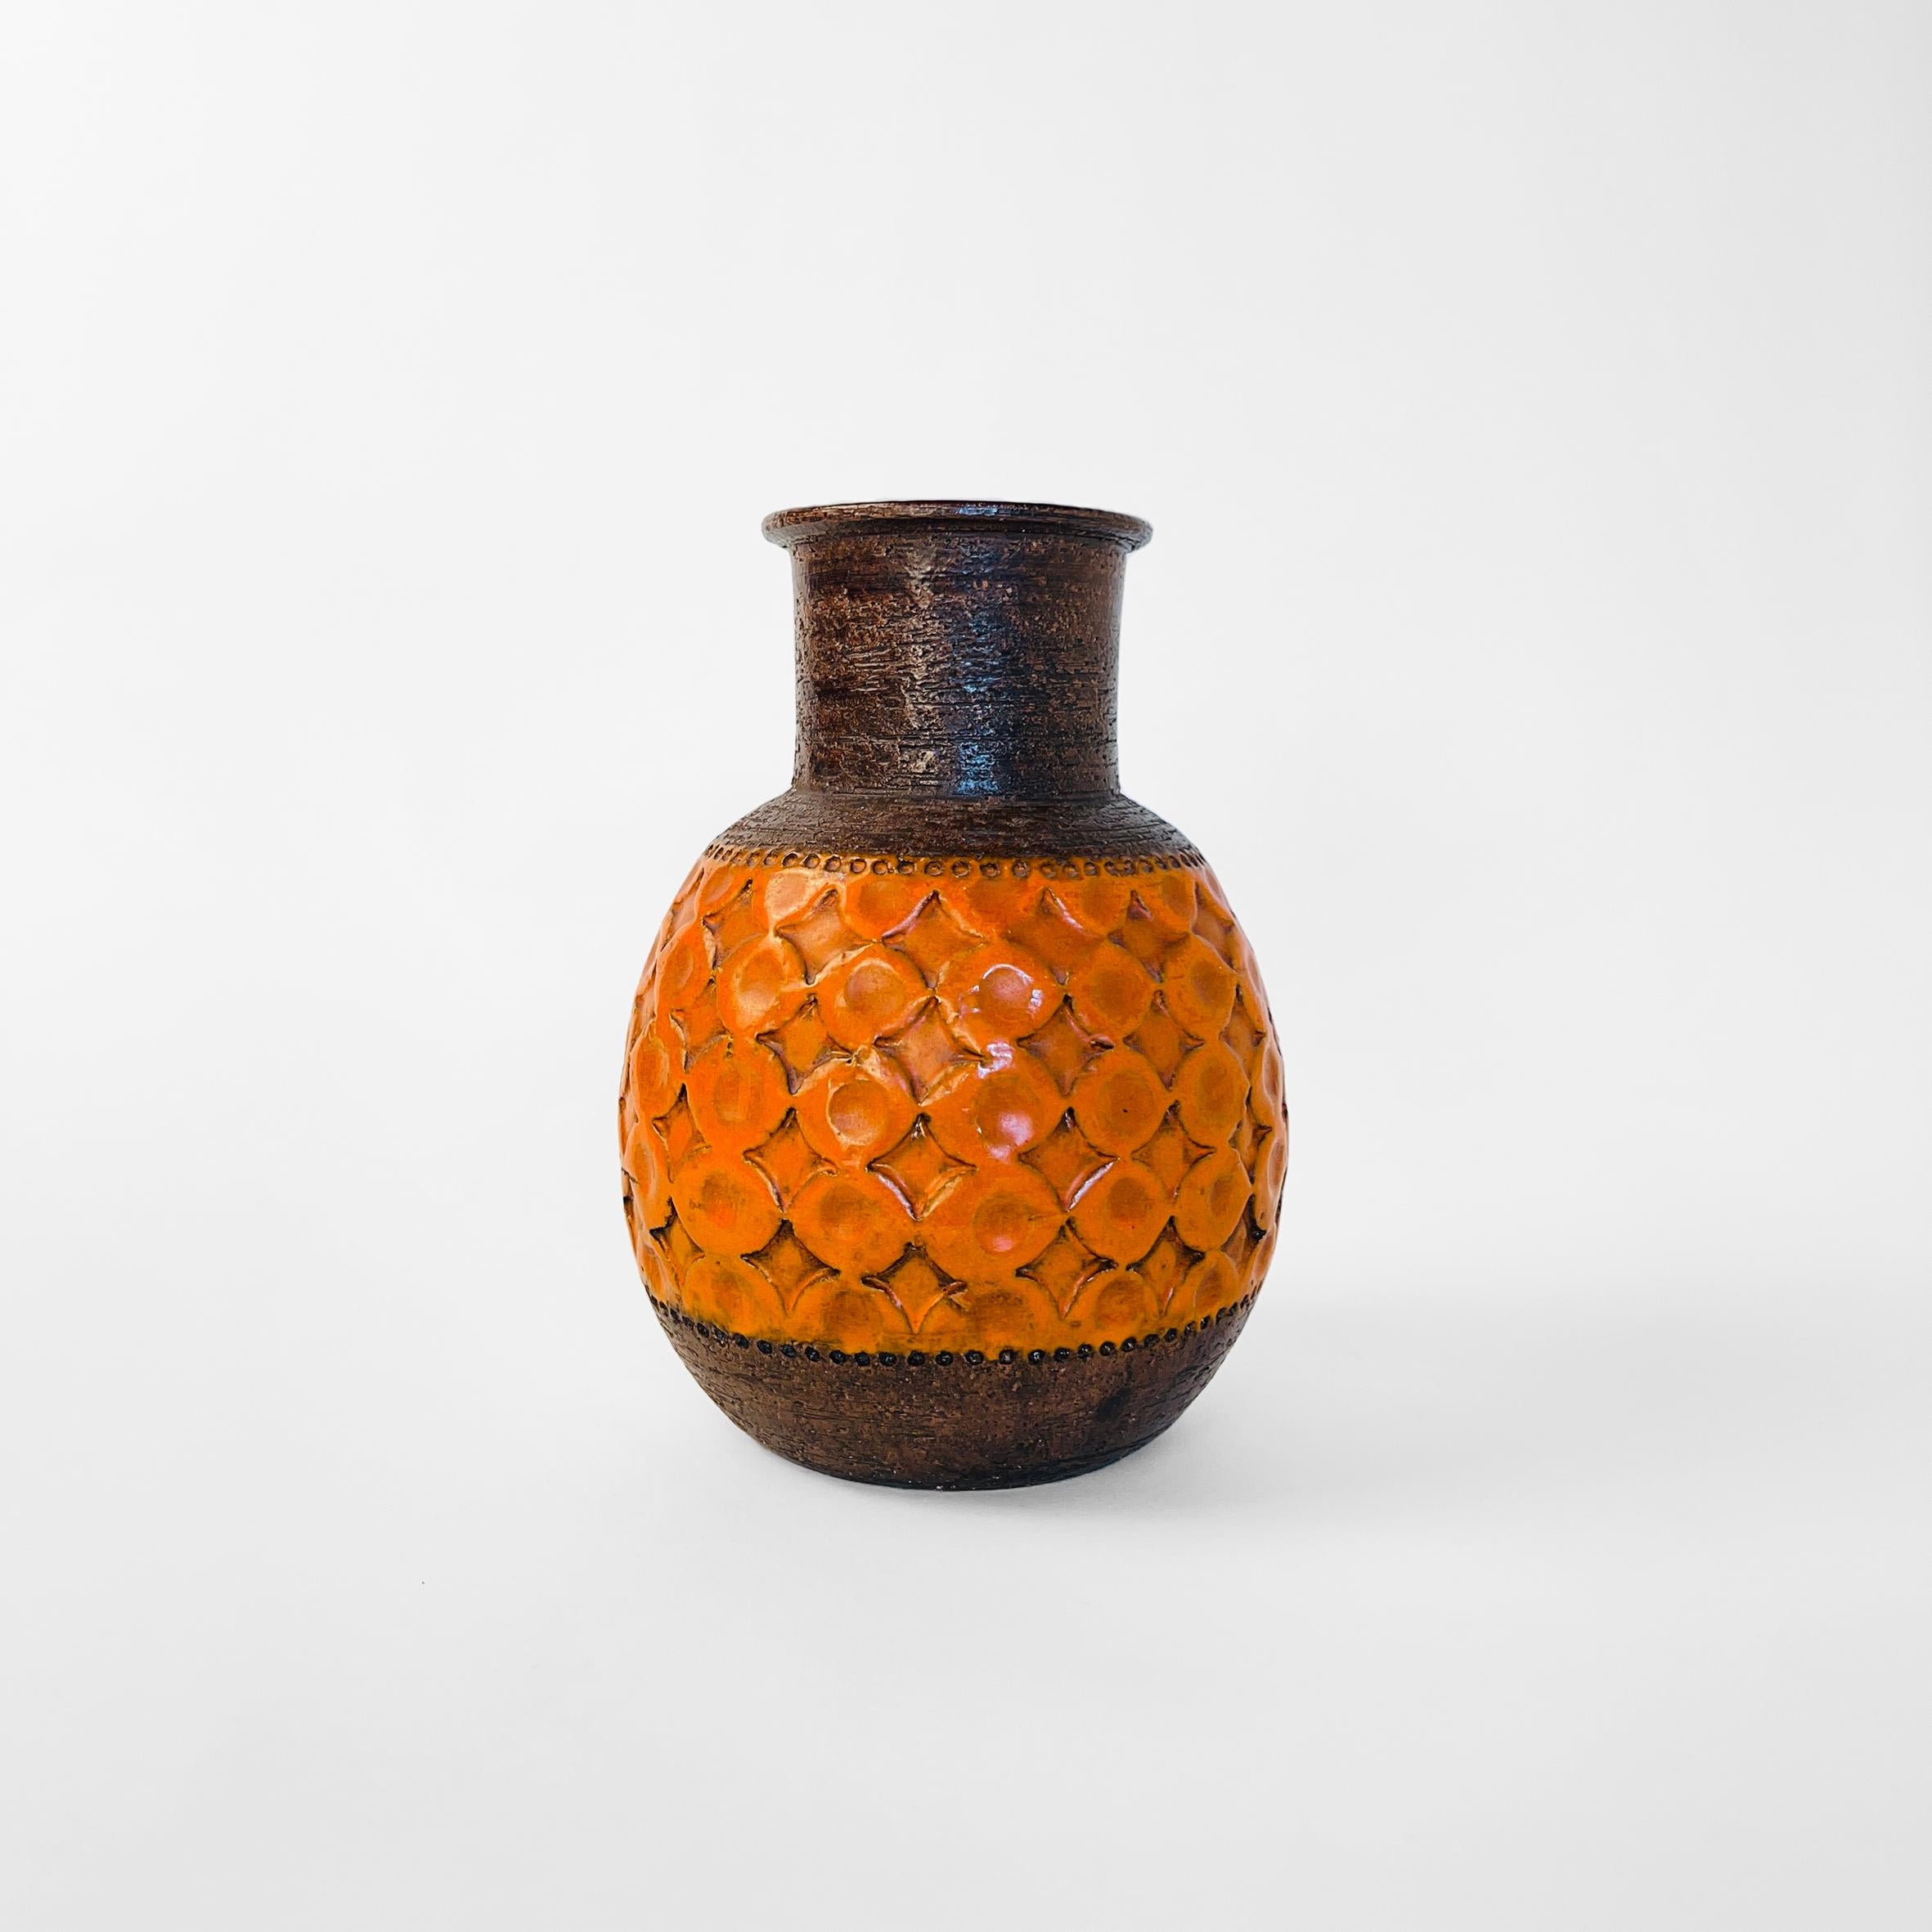 Fat lava style orange vase. Bottom and neck in deep brown textured finish and pattern band in the center, finished in bright orange glaze.